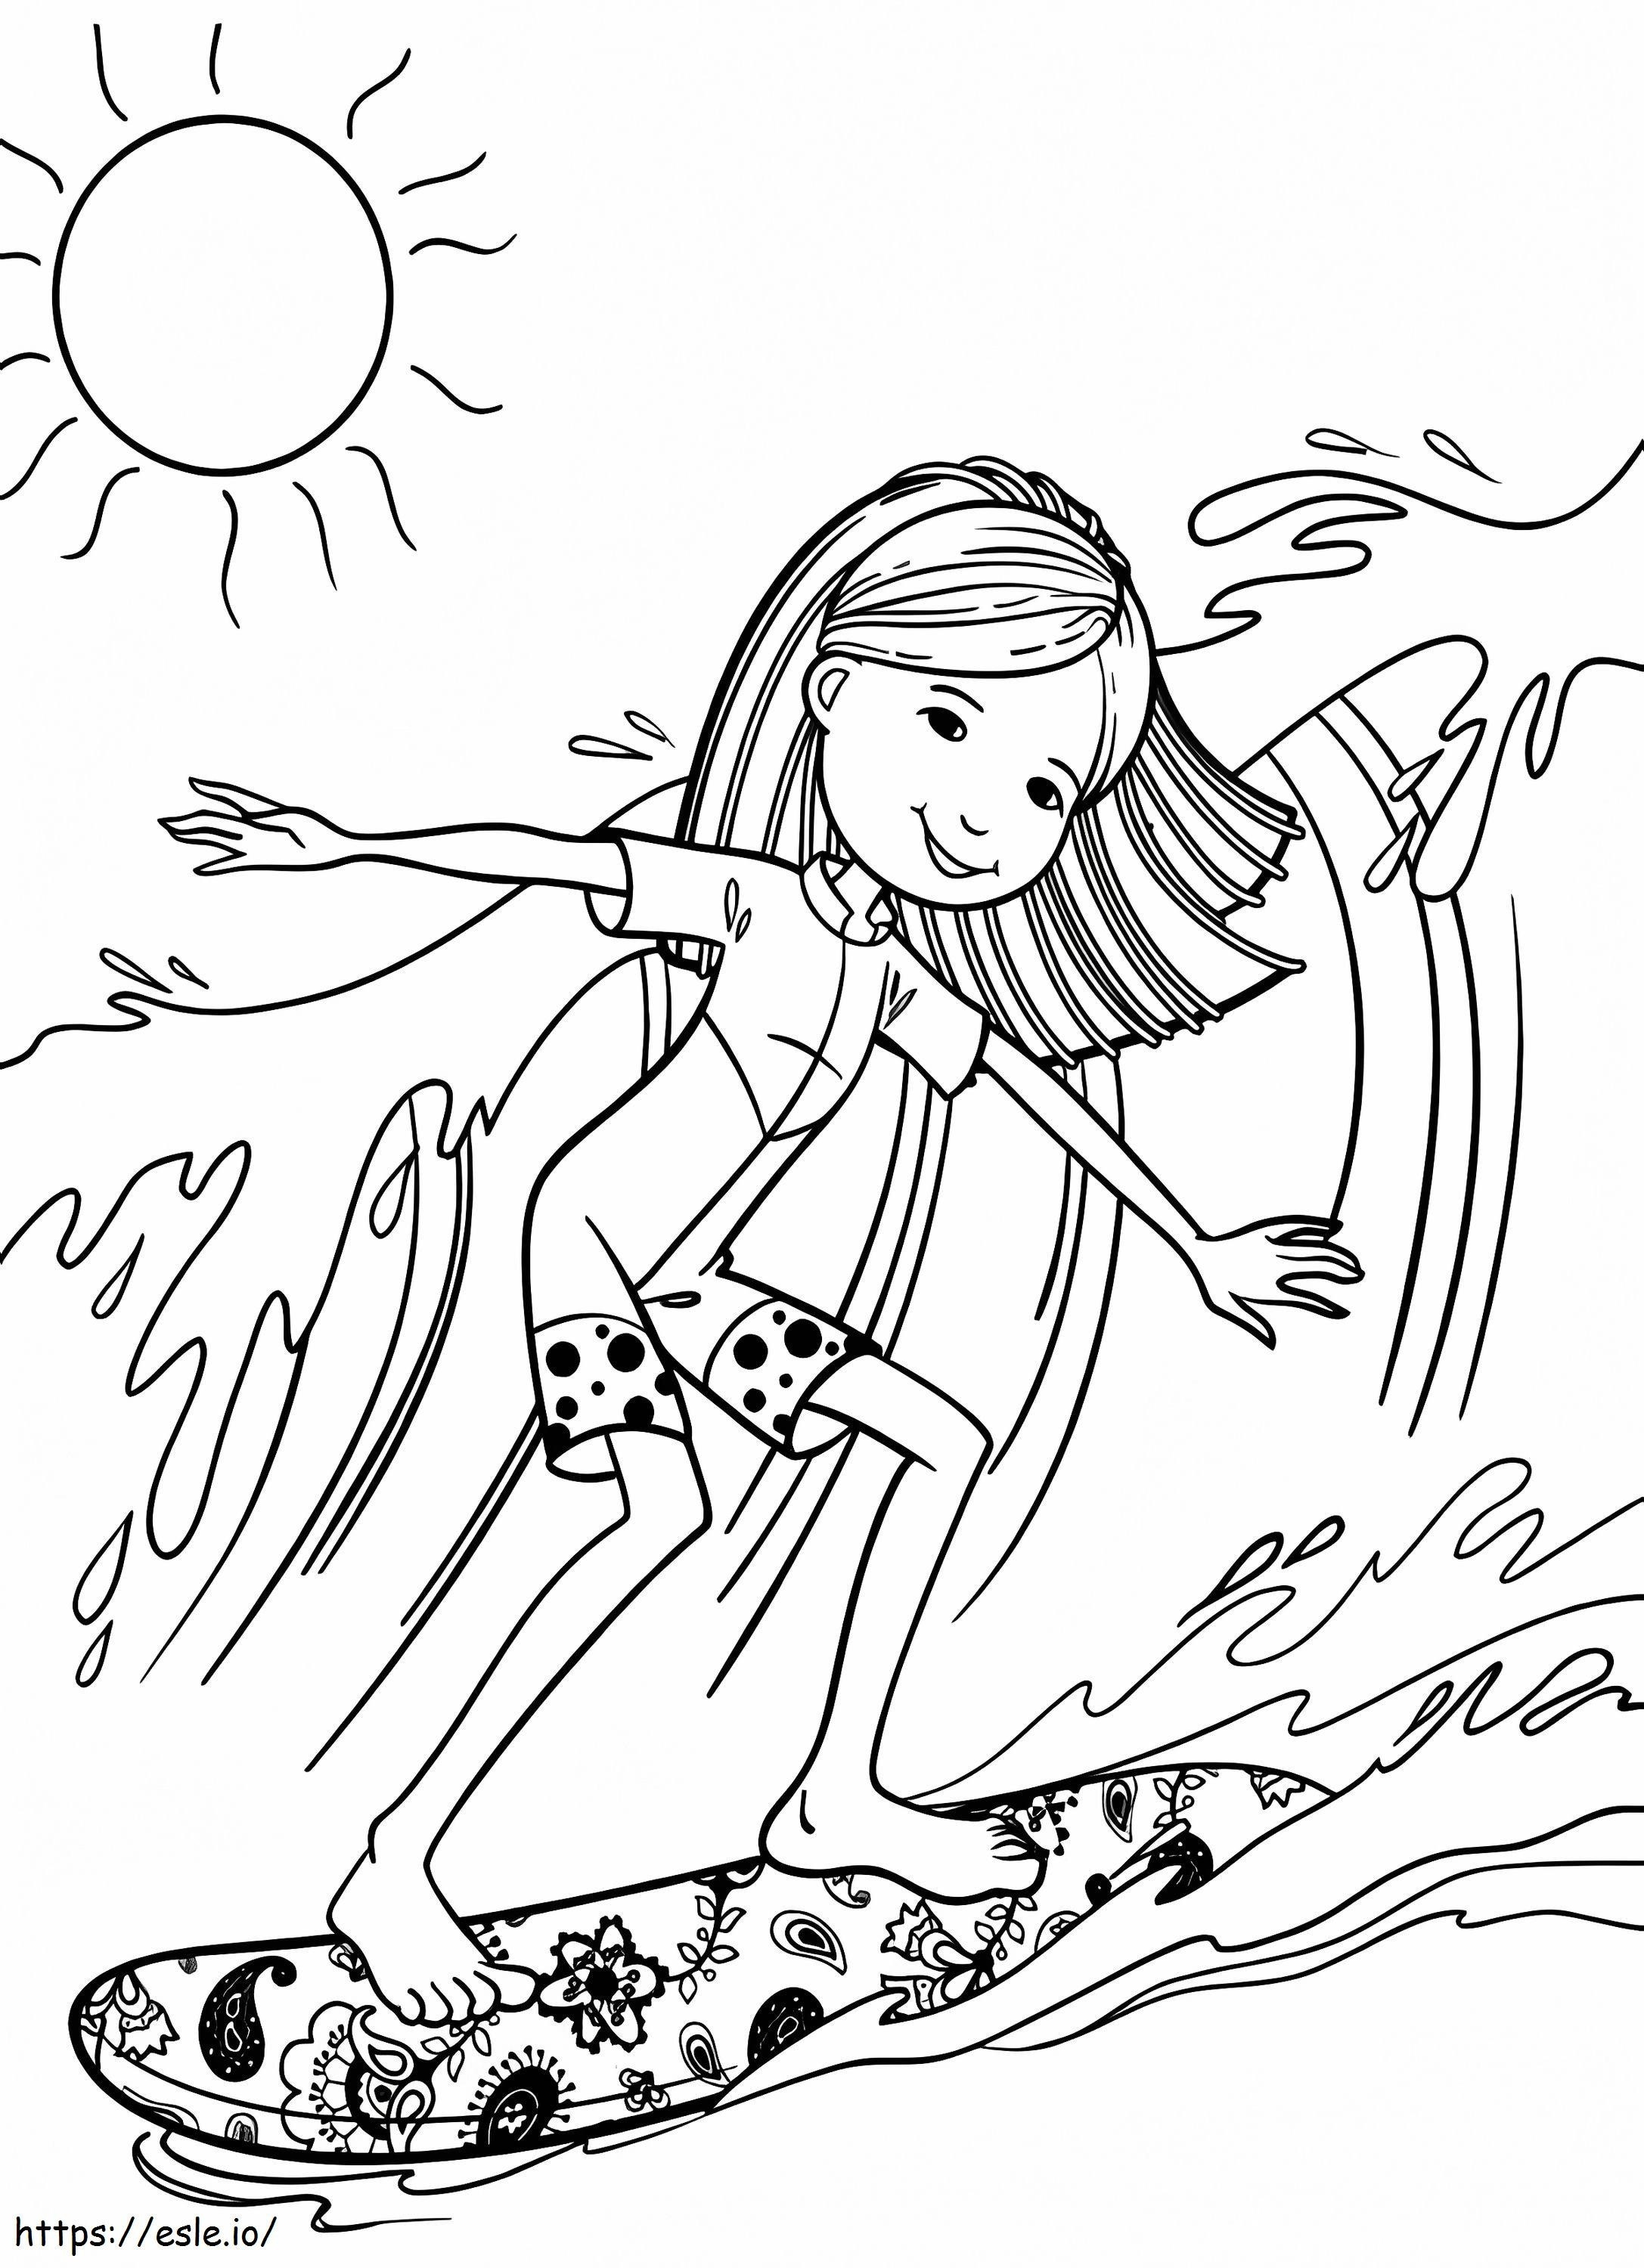 Young Girl Surfing coloring page